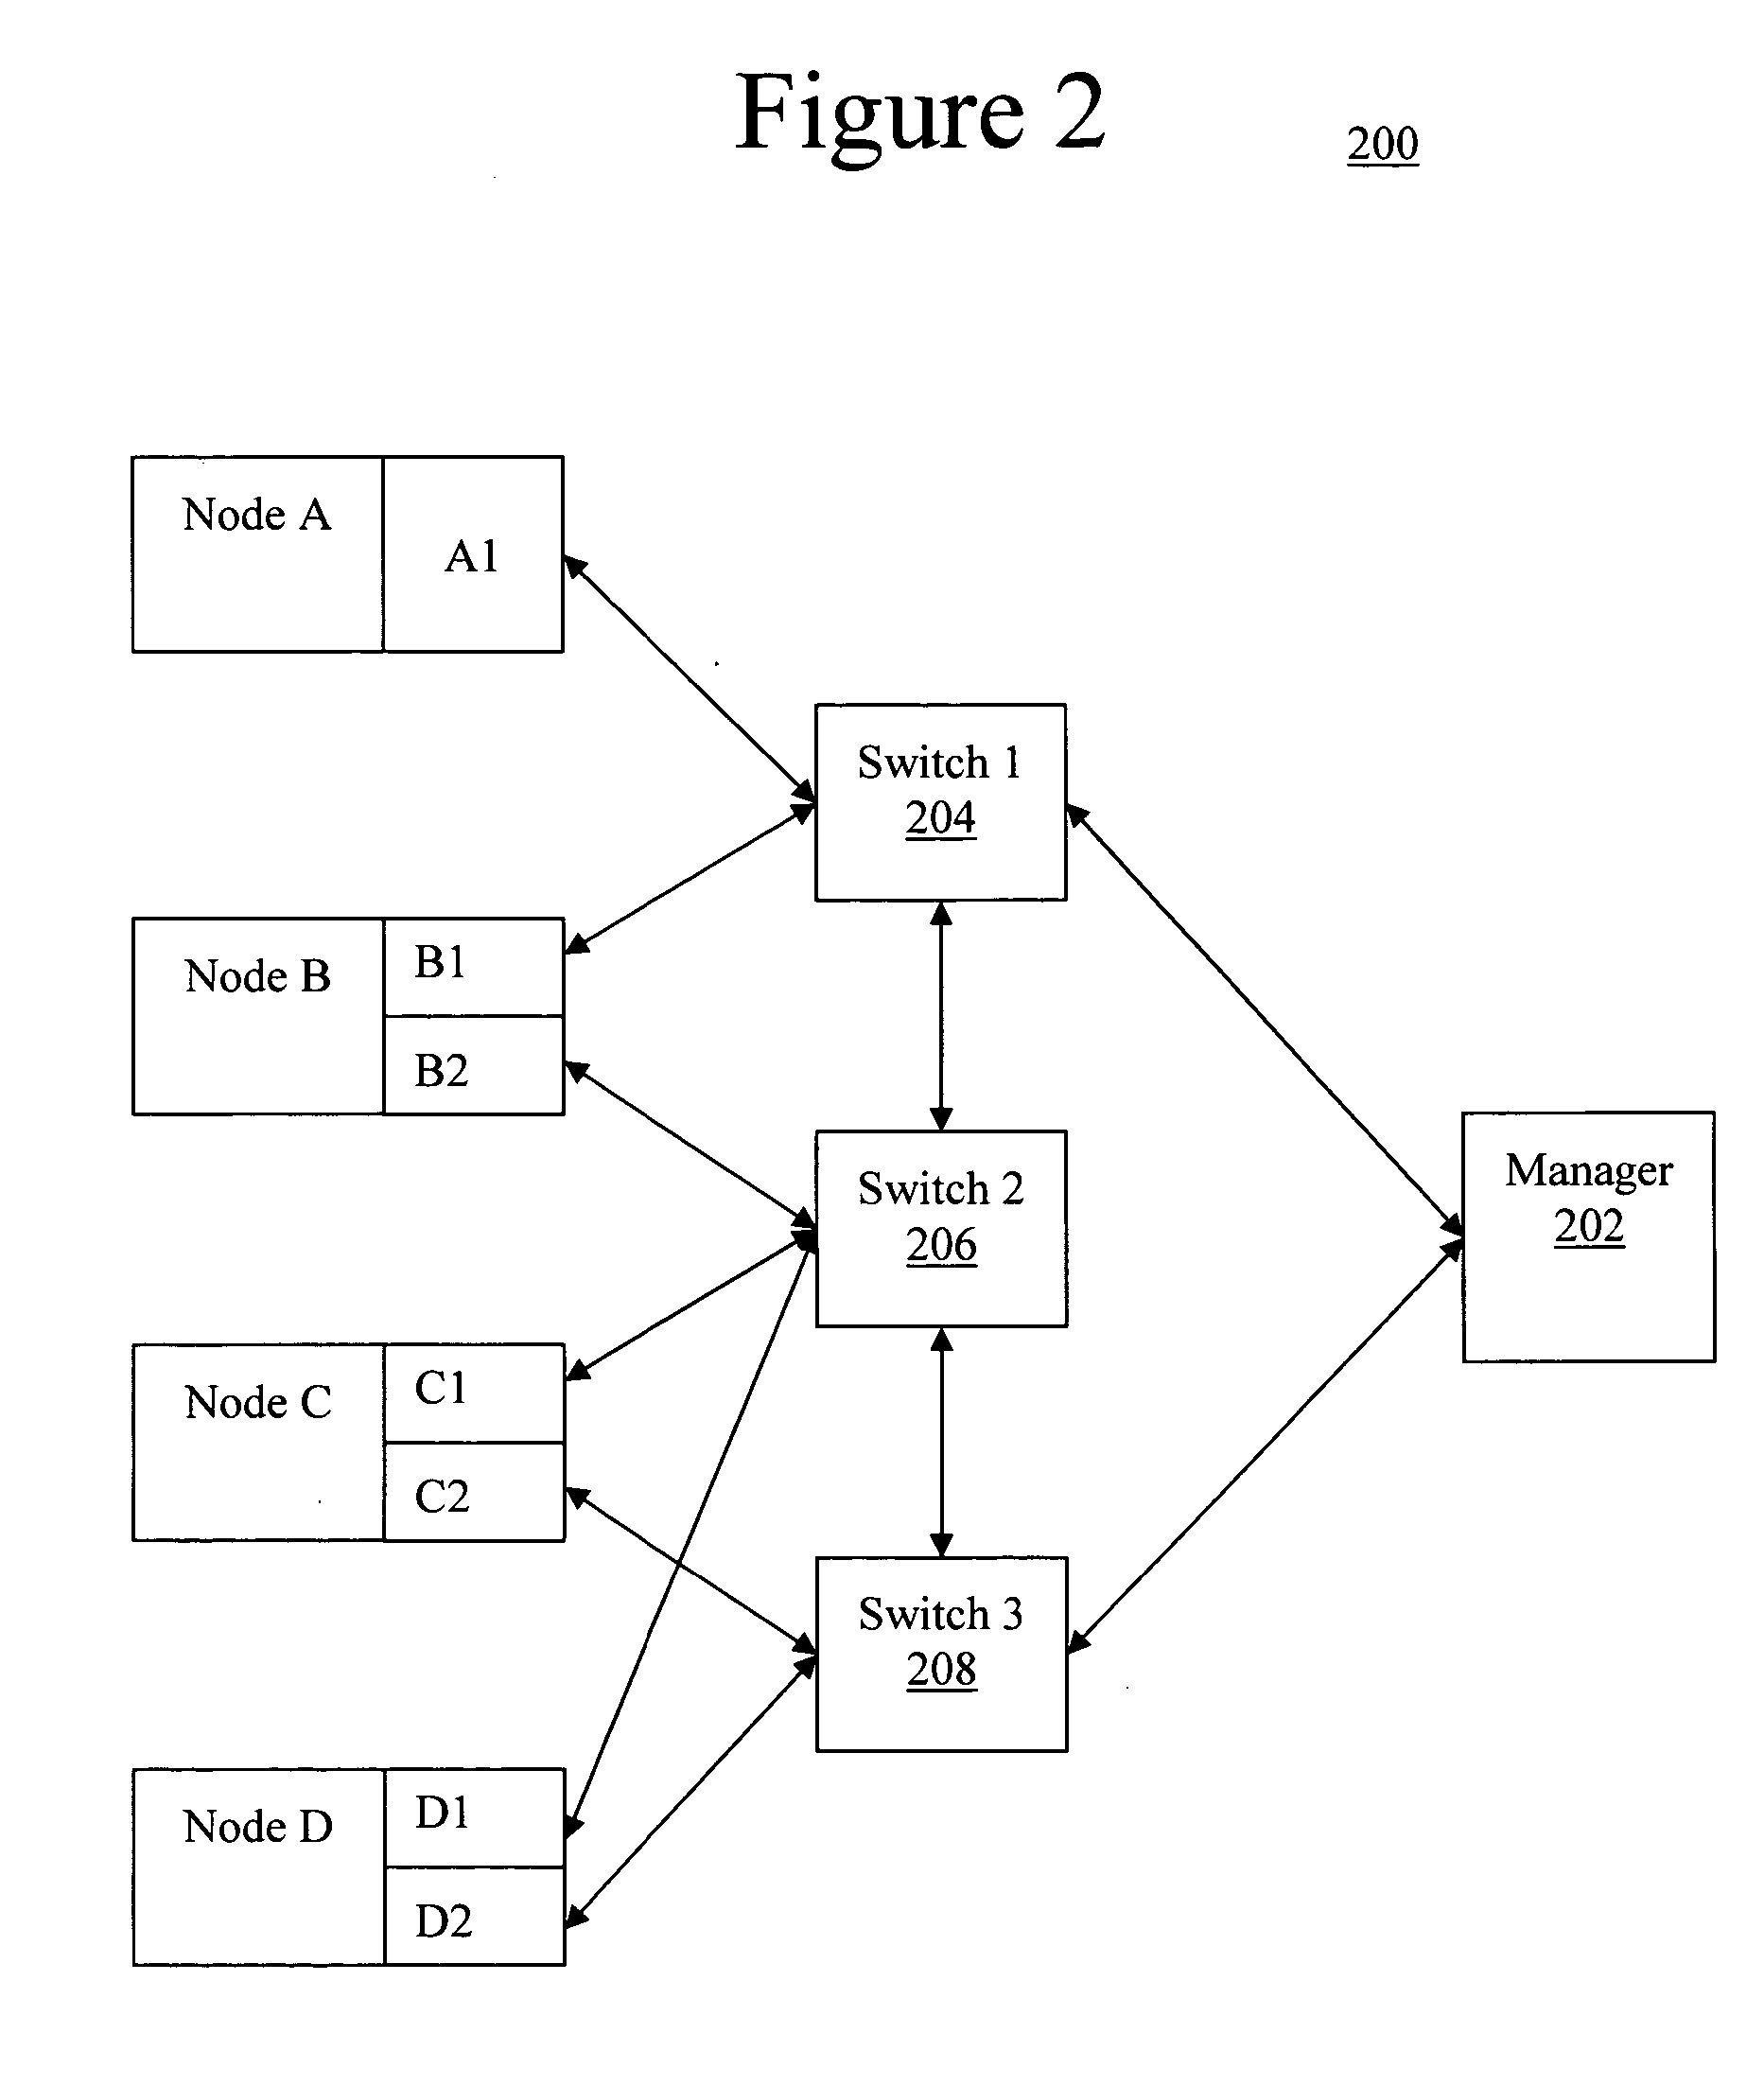 Apparatus and methods for managing nodes on a fault tolerant network